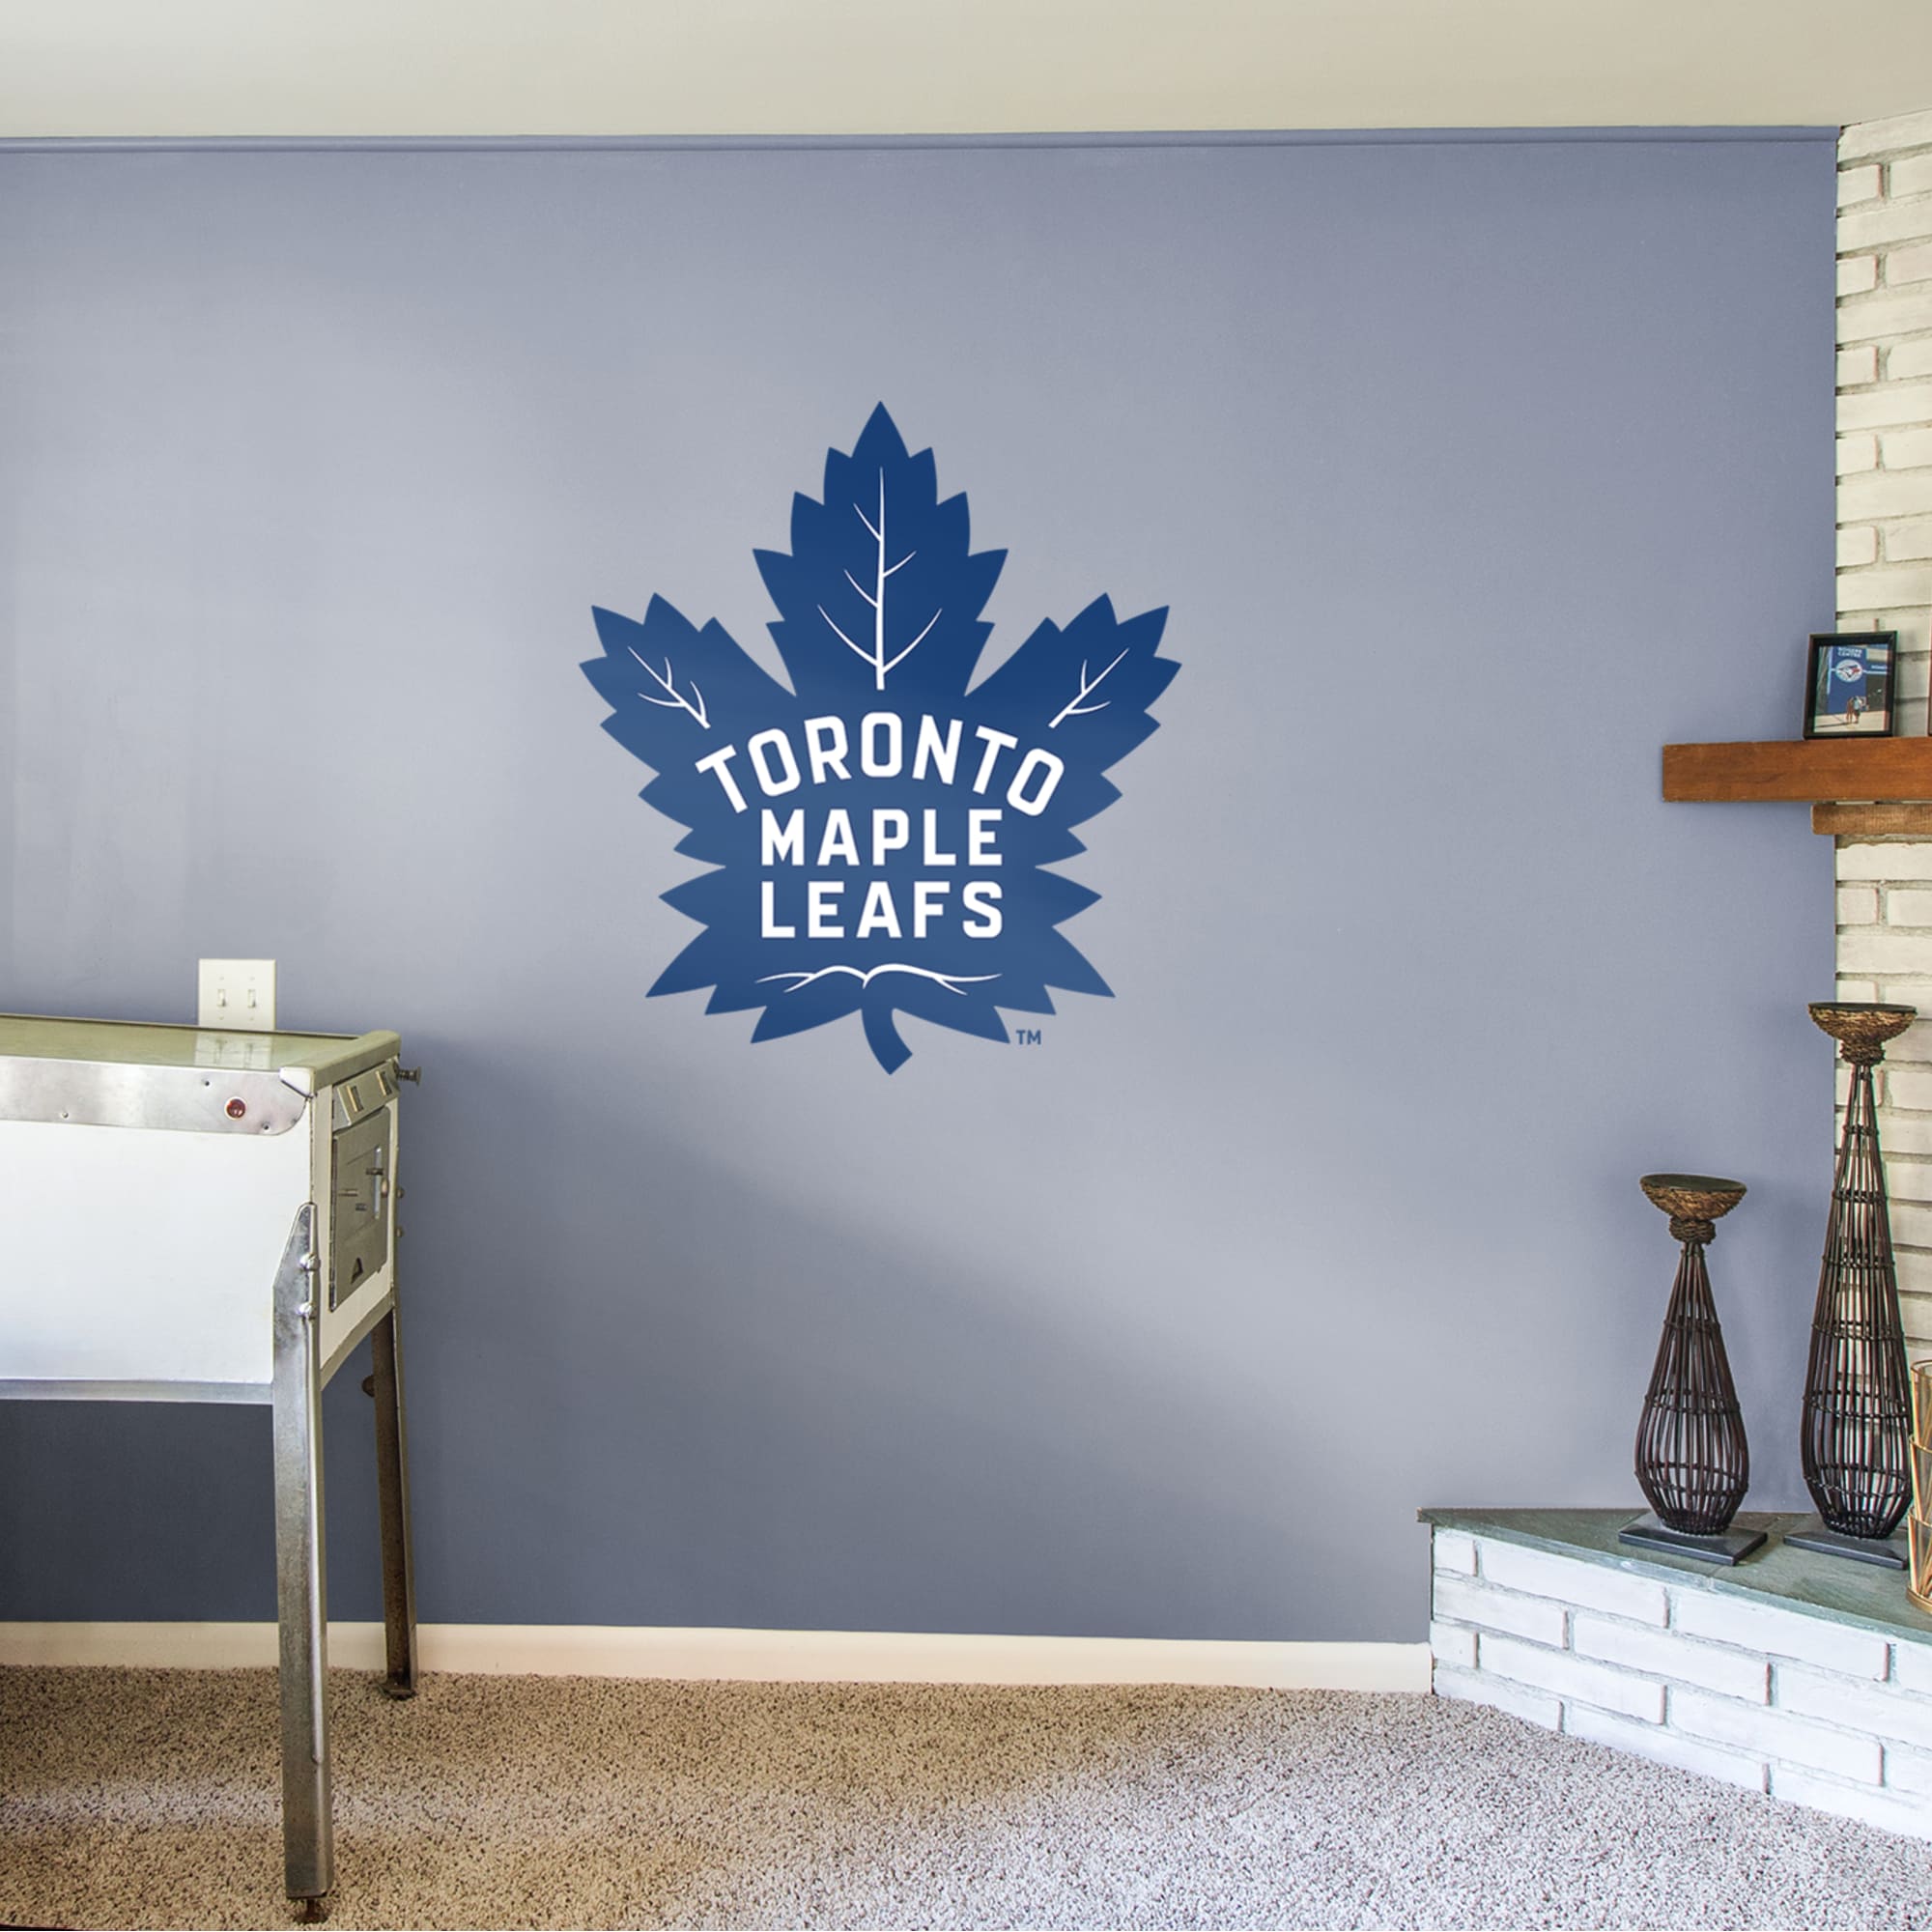 Toronto Maple Leafs: Logo - Officially Licensed NHL Removable Wall Decal 38.0"W x 43.0"H by Fathead | Vinyl